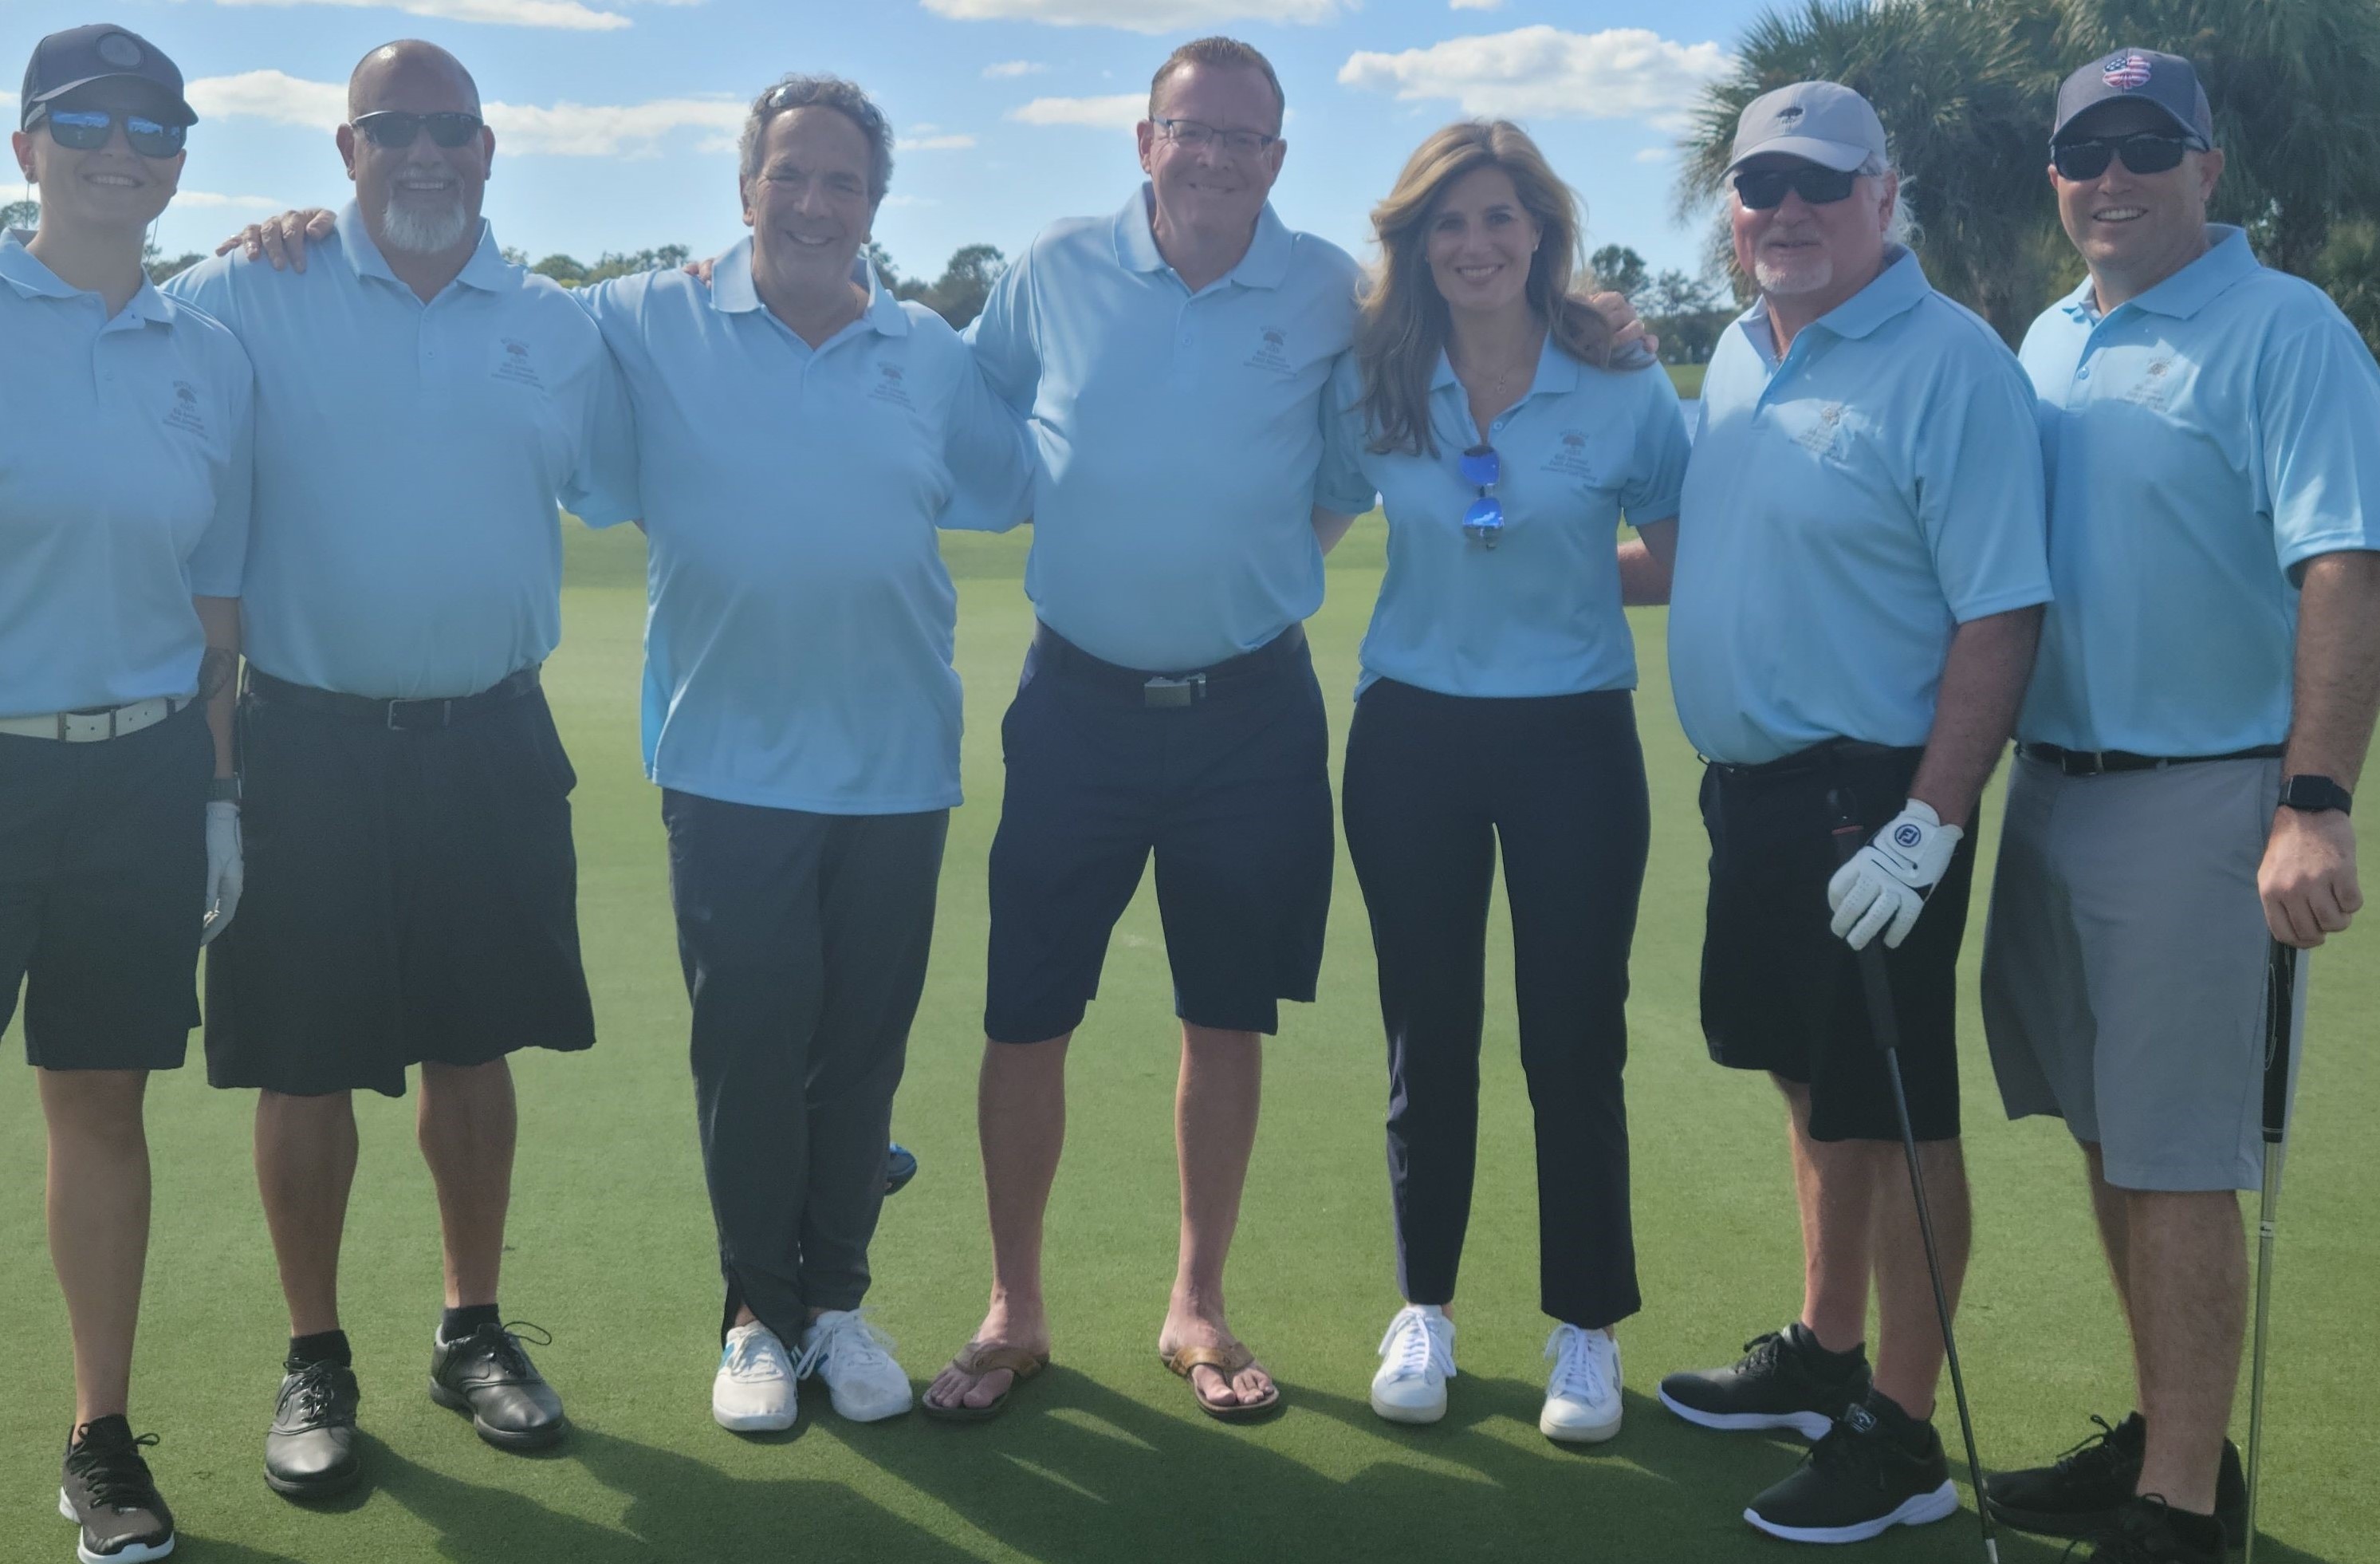 A group of seven people in pale blue golf shirts stands on a golf course